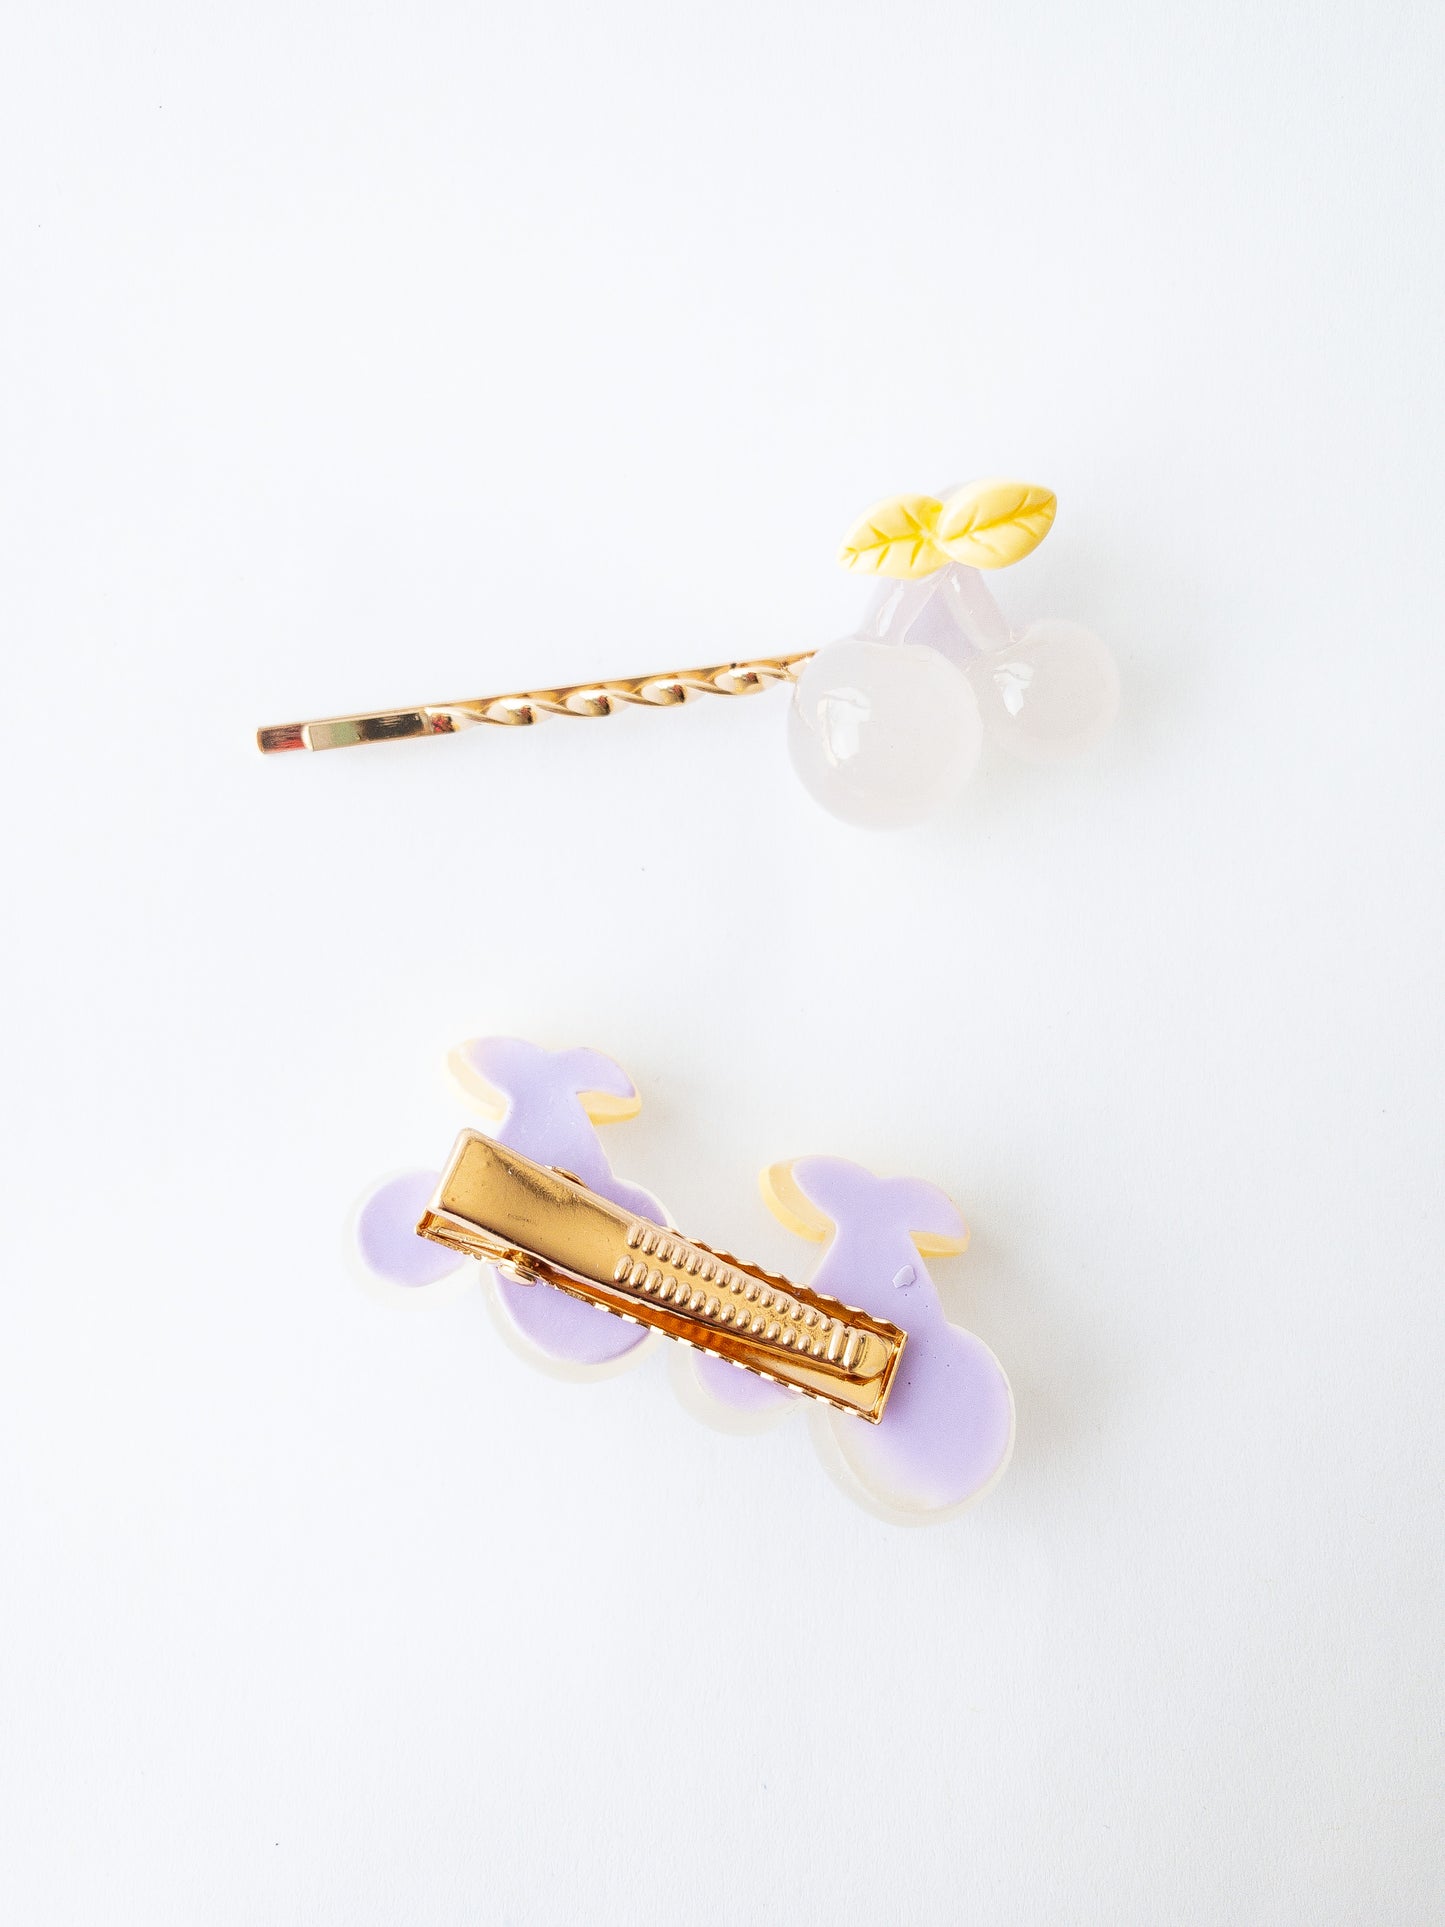 Milky jelly cherries with a pretty purple tint. Two sets of cherries on a small alligator clip and one set of cherries on a beautiful twisted gold bobby pin. 